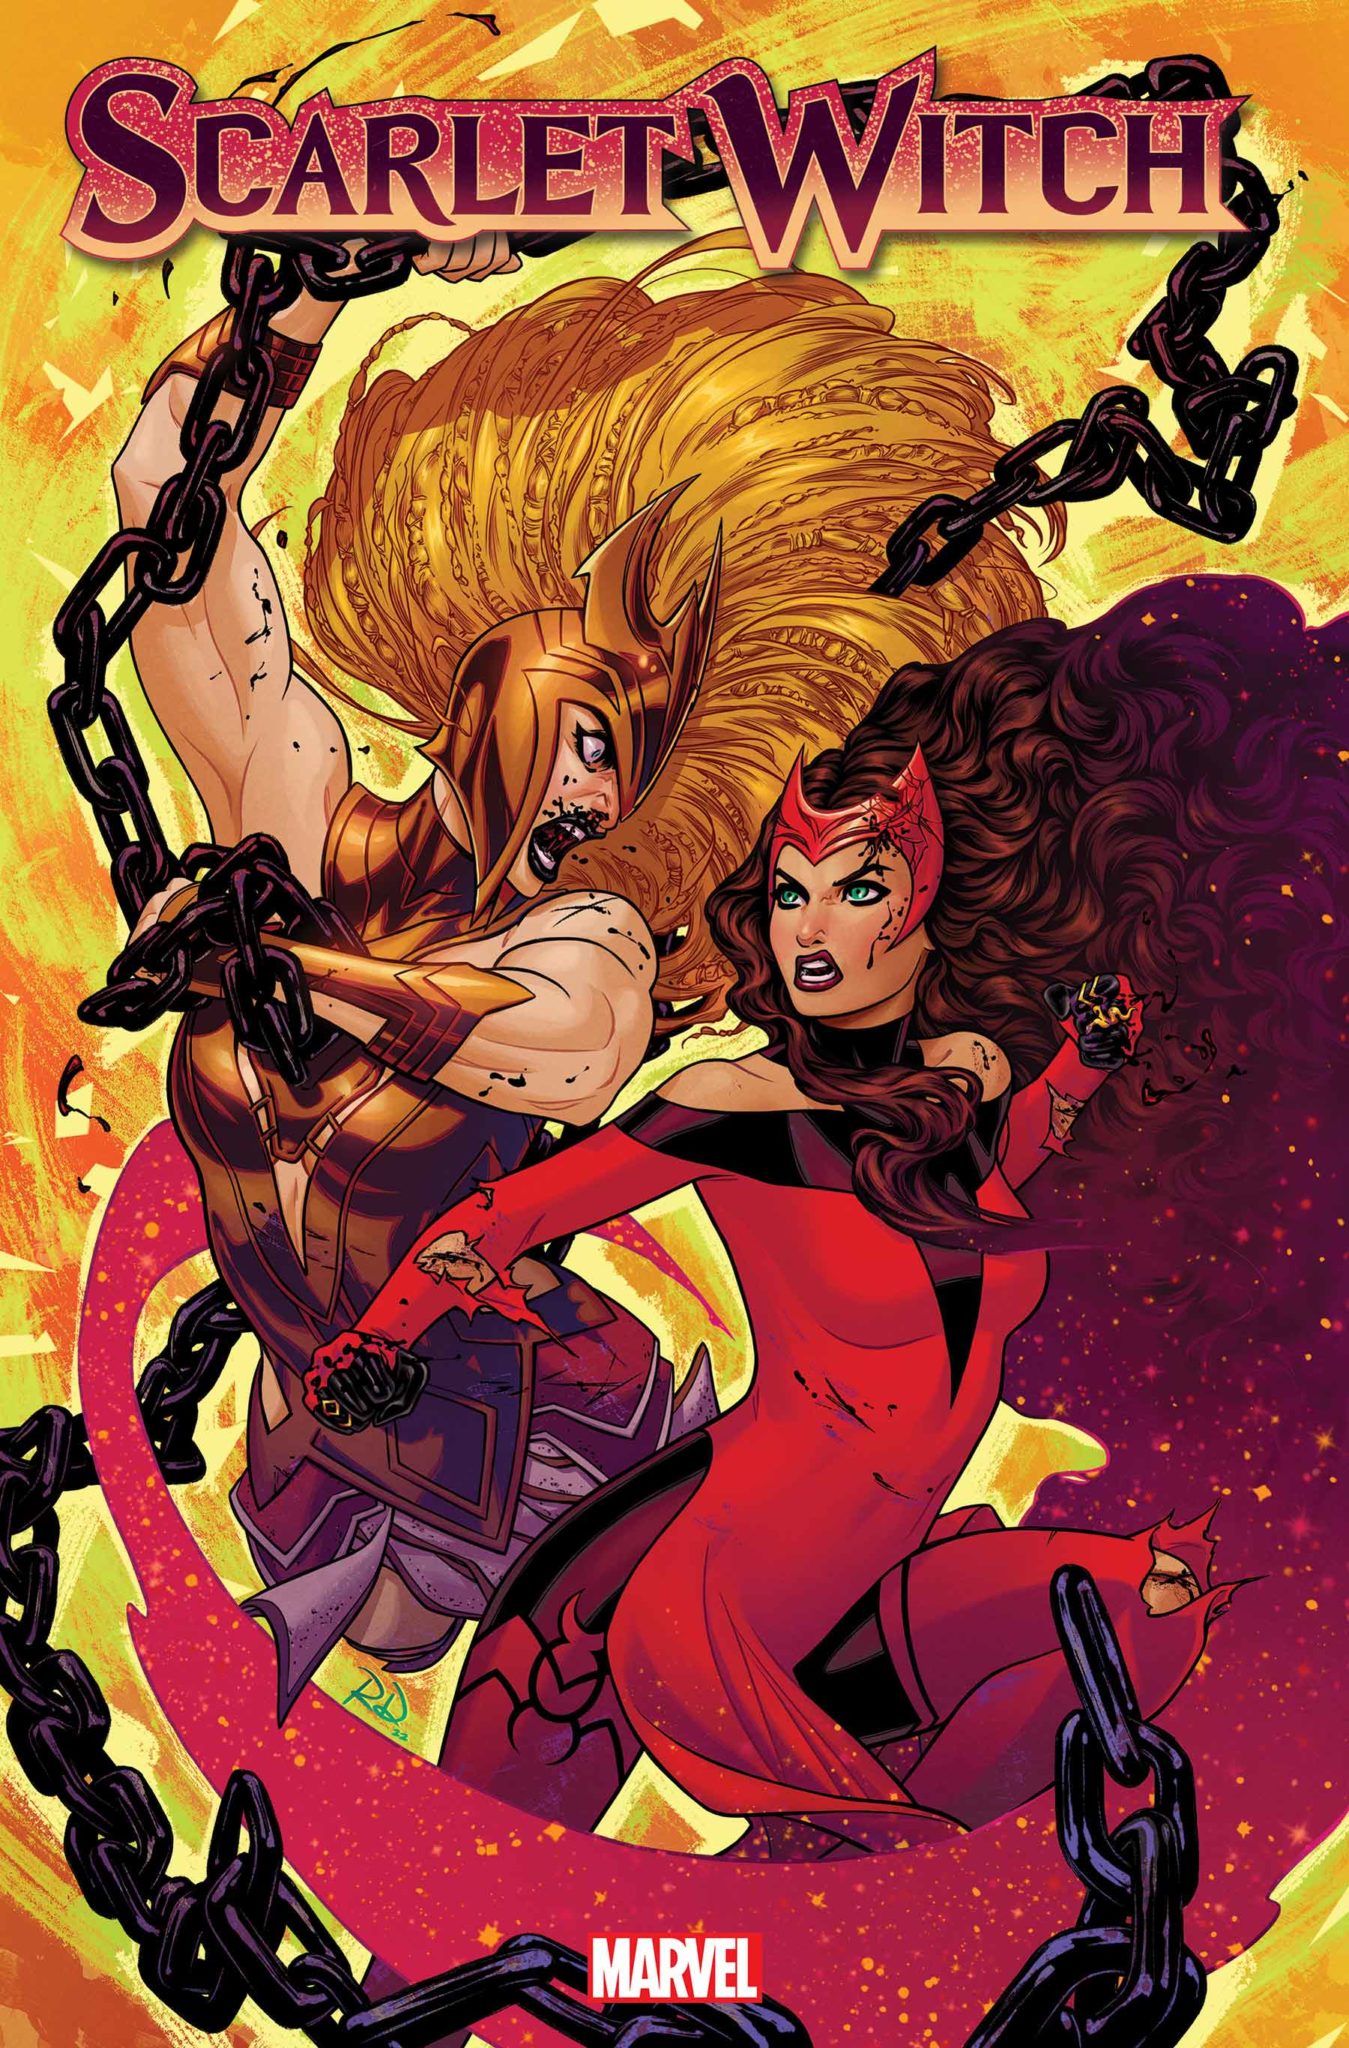 Scarlet Witch #5 cover